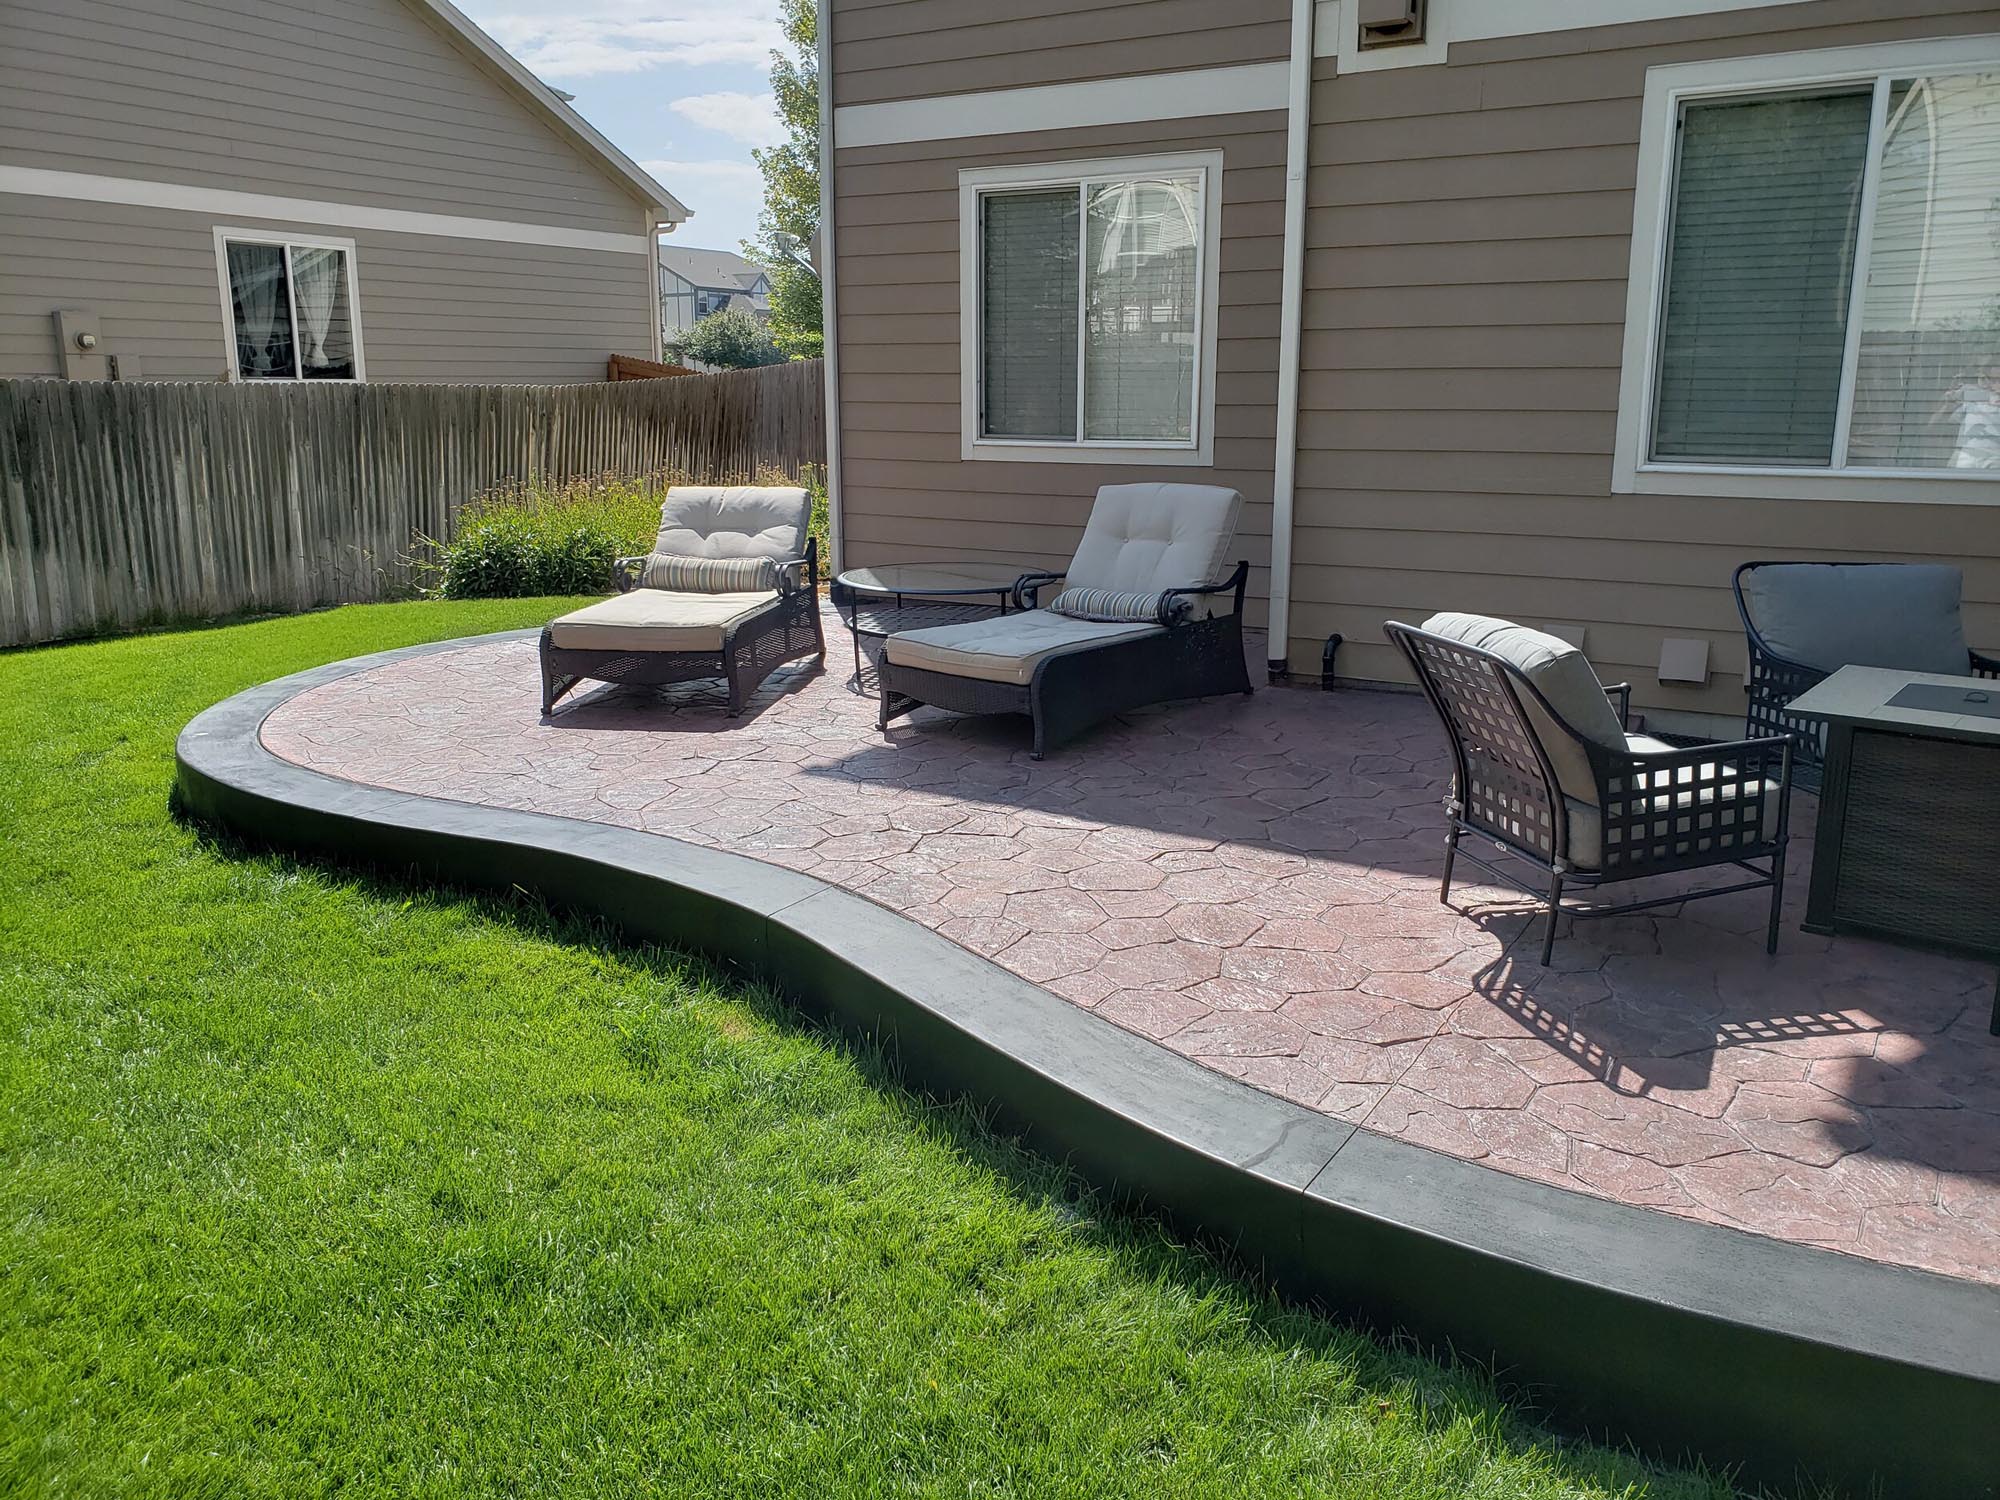 Curved stone patio with lounging chairs